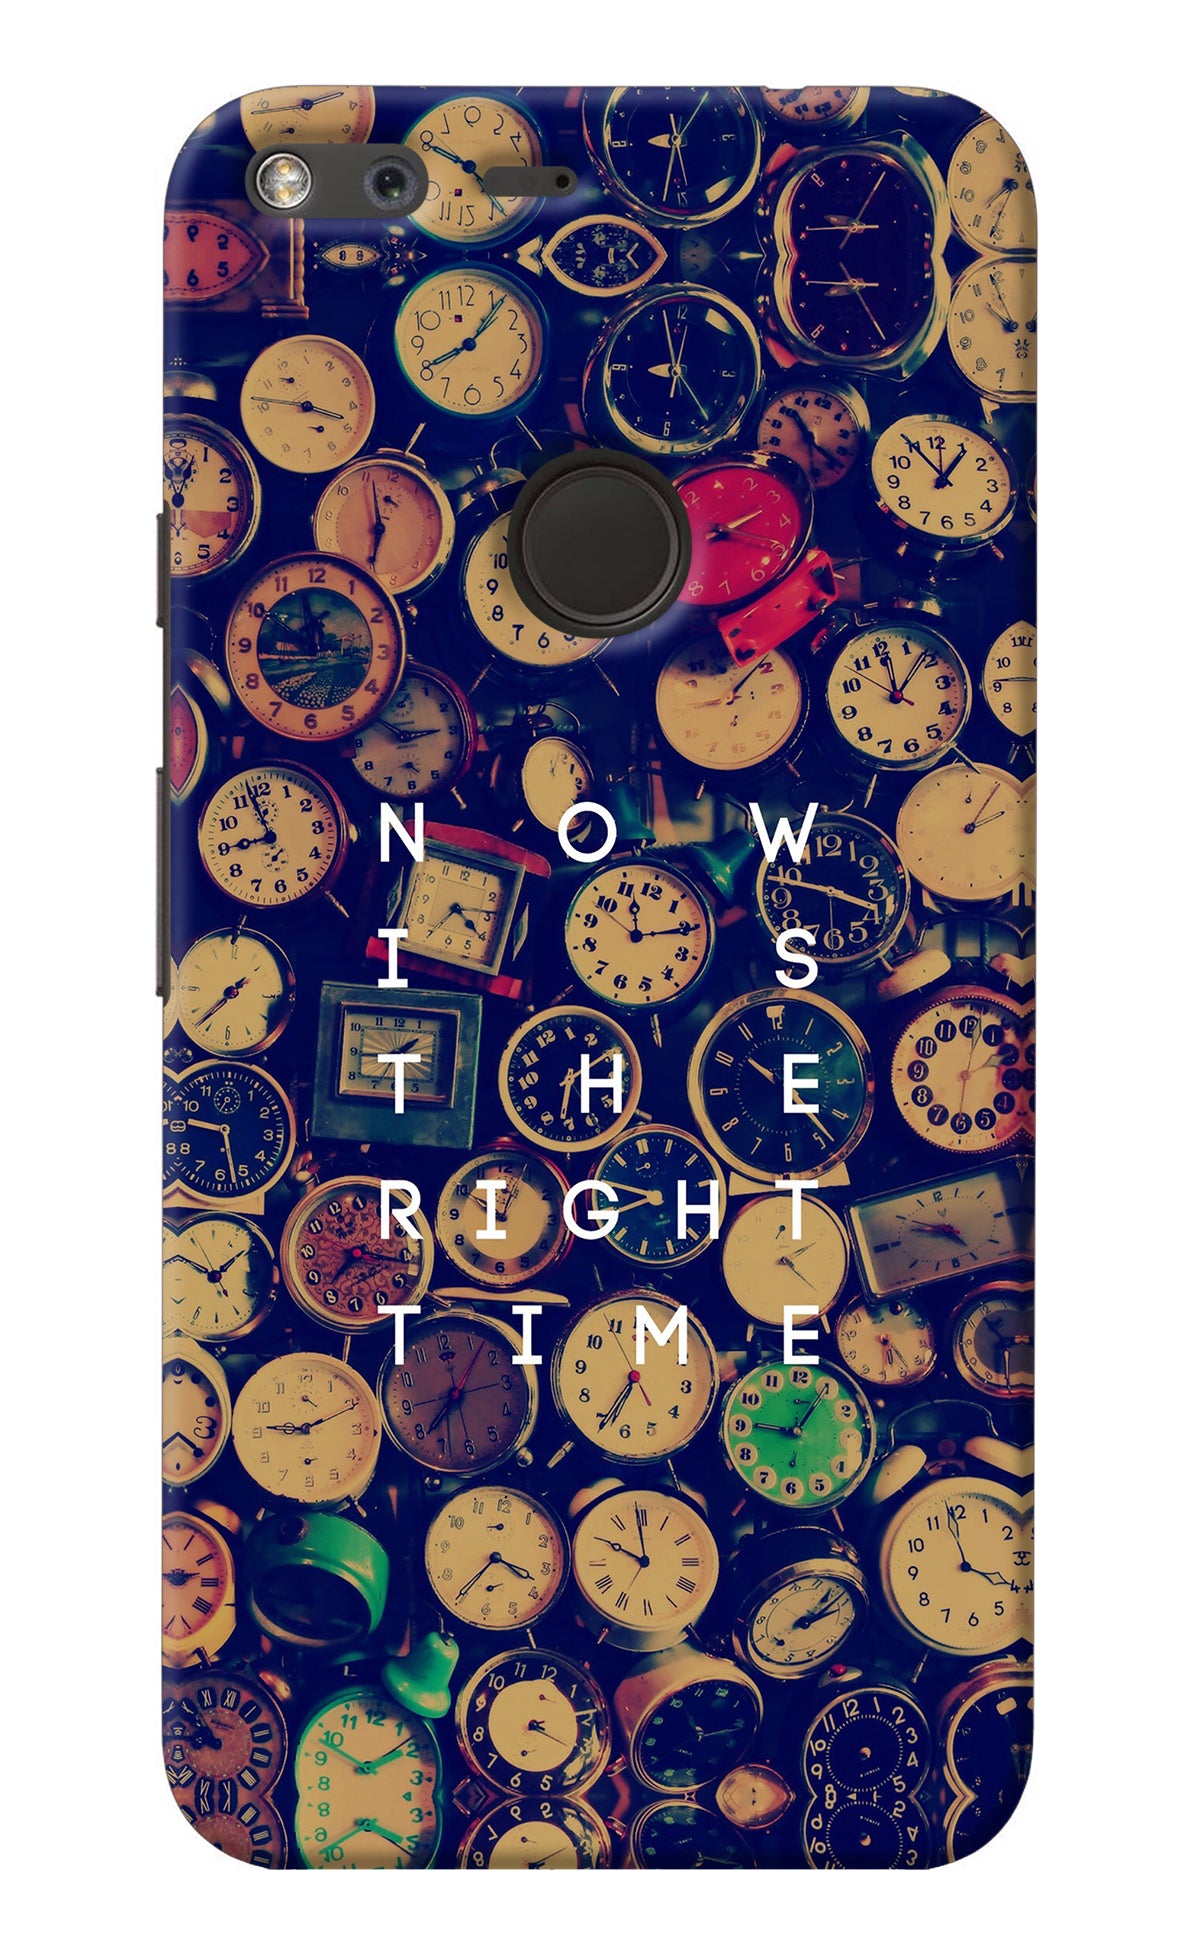 Now is the Right Time Quote Google Pixel XL Back Cover